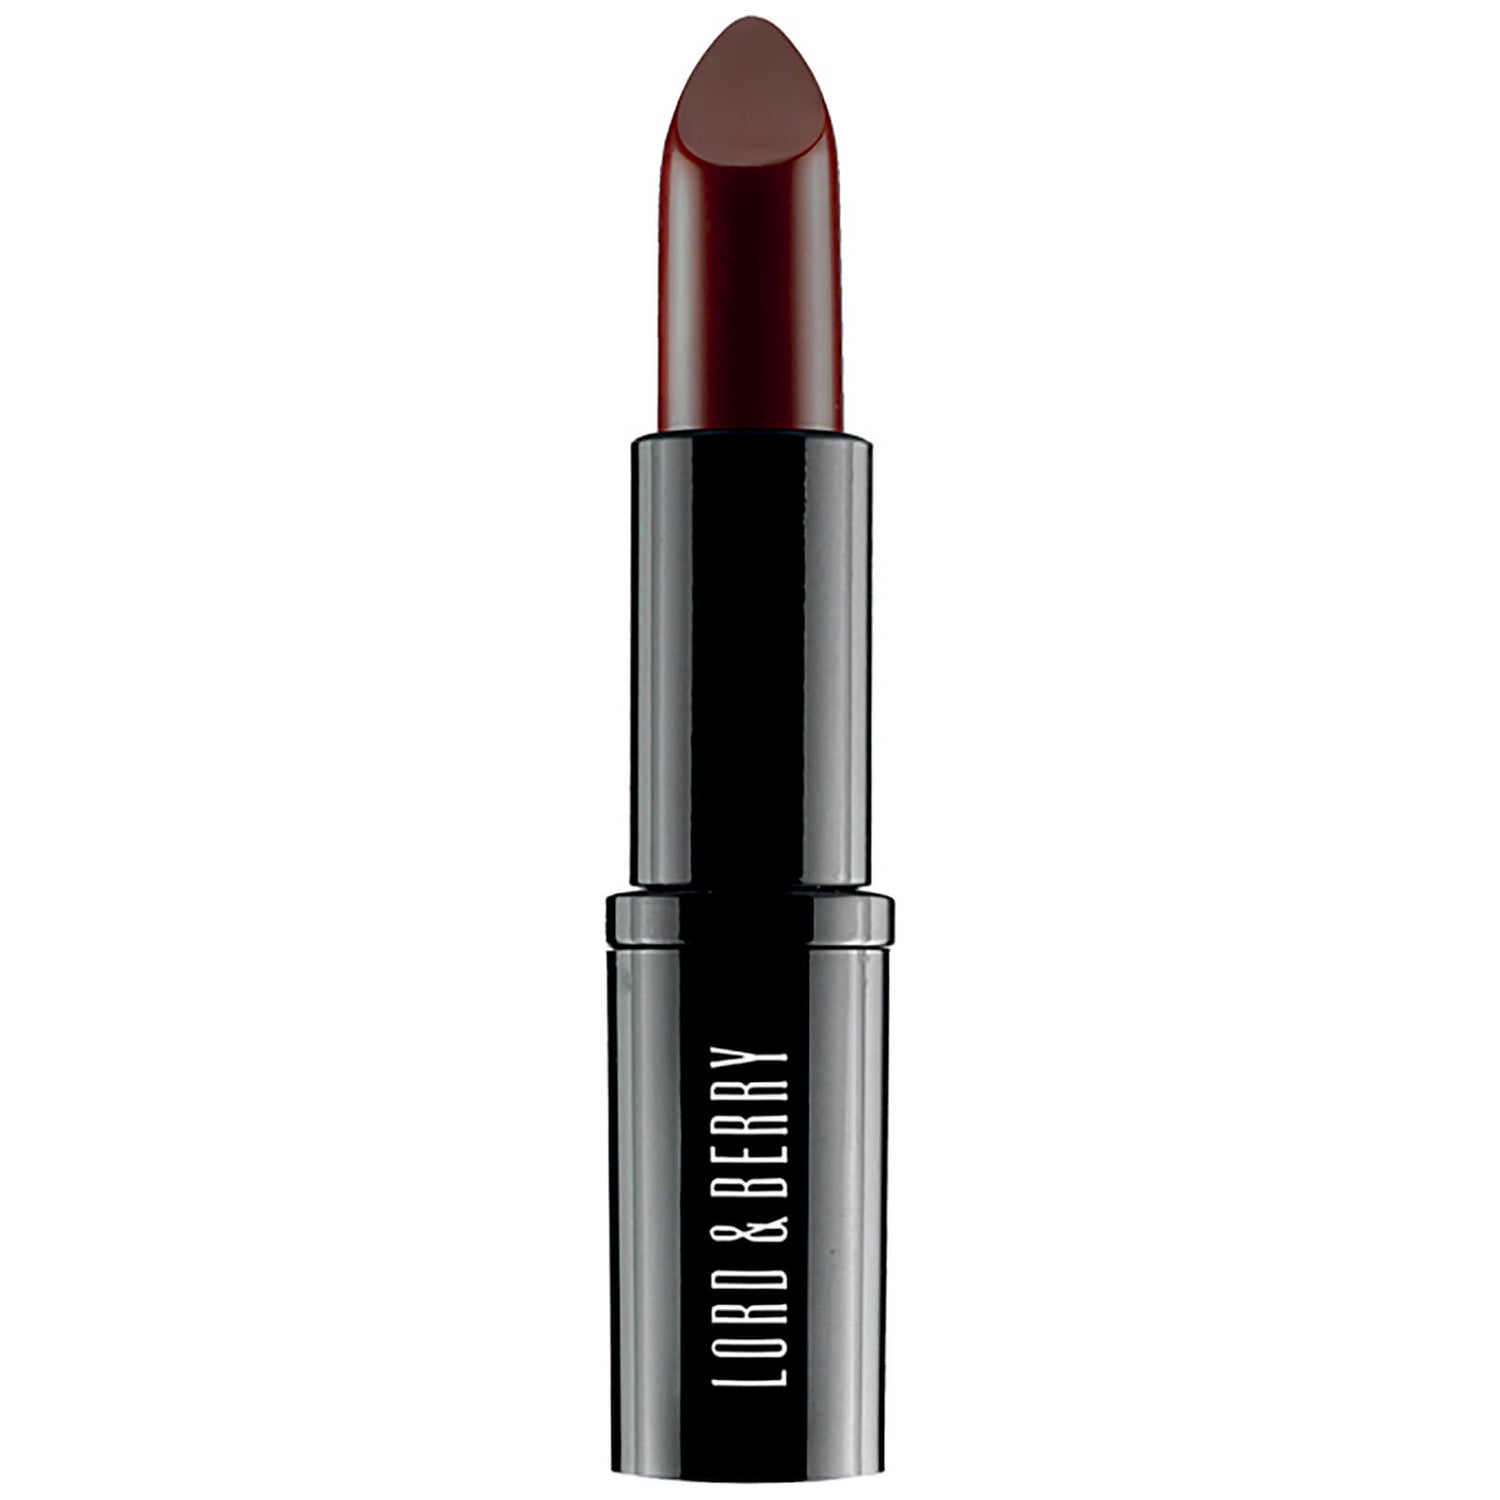 Lord & Berry Absolute Intensity Lipstick (Various Shades) - Sleek and Chic